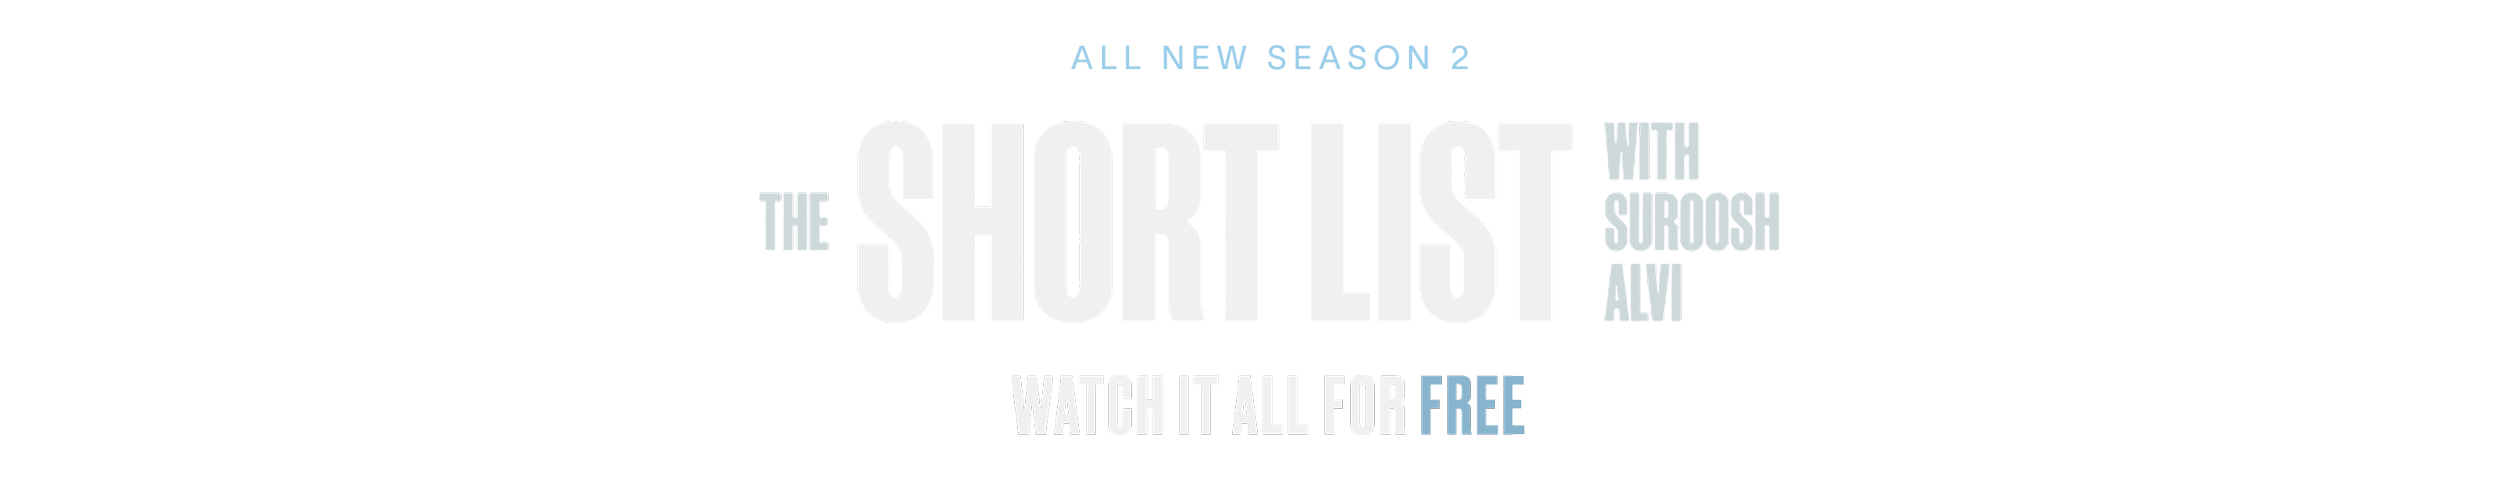 All New Season 2. The Short List with Suroosh Alvi. Watch it all for free.